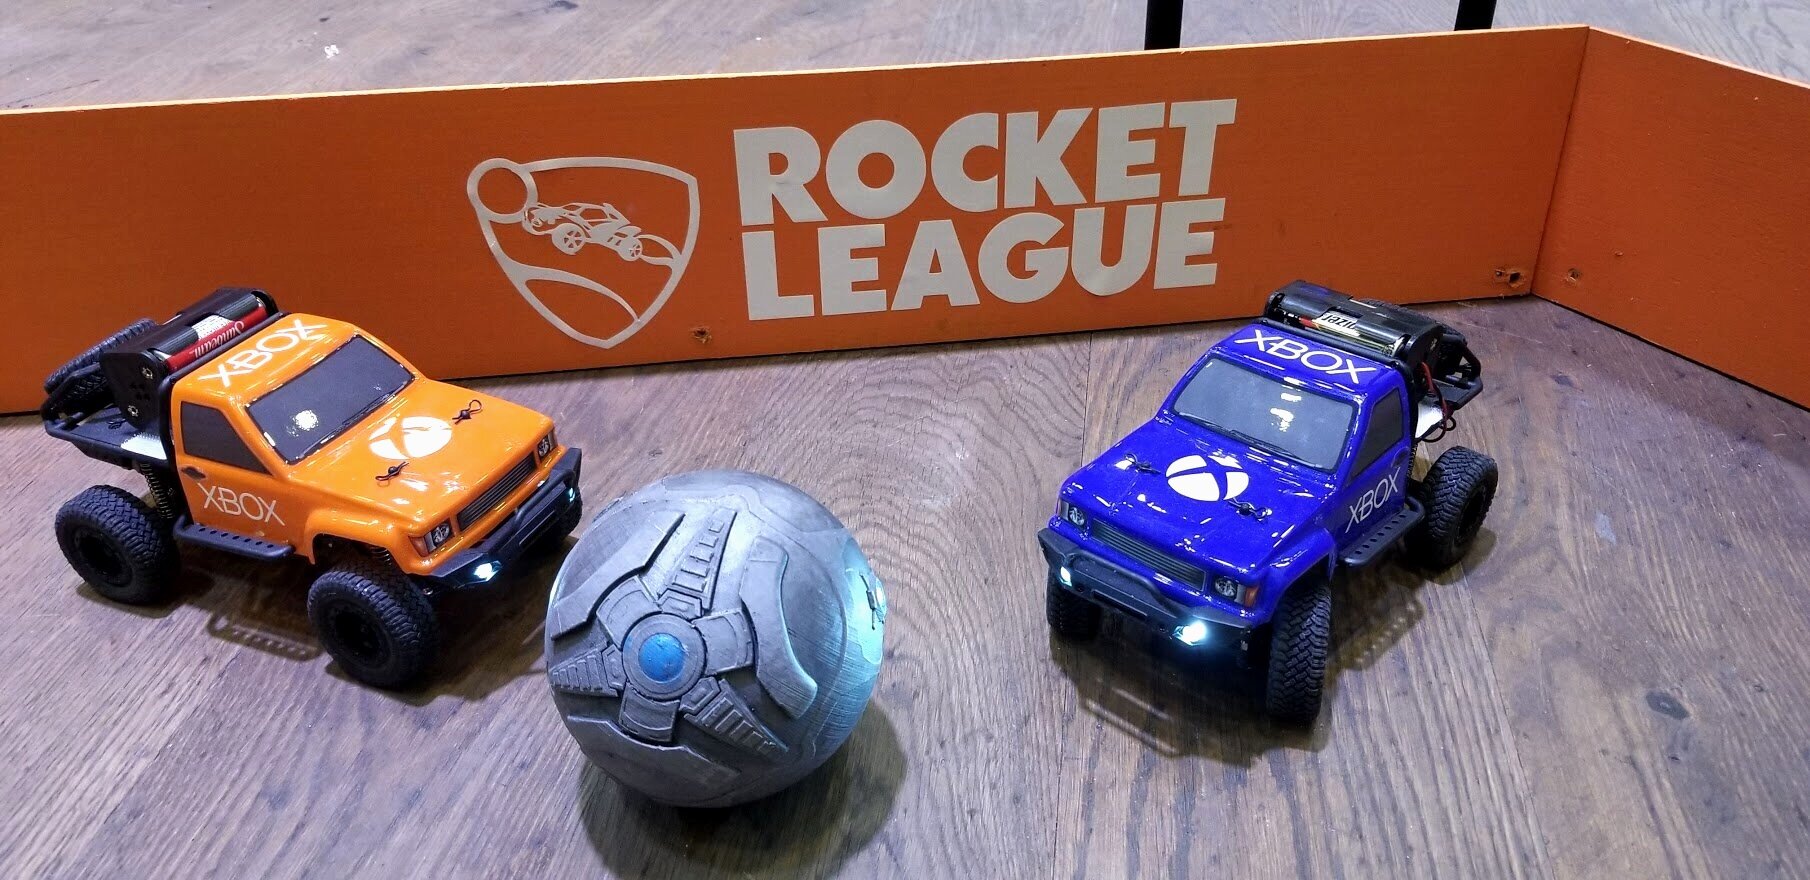 Real Rocket League Game